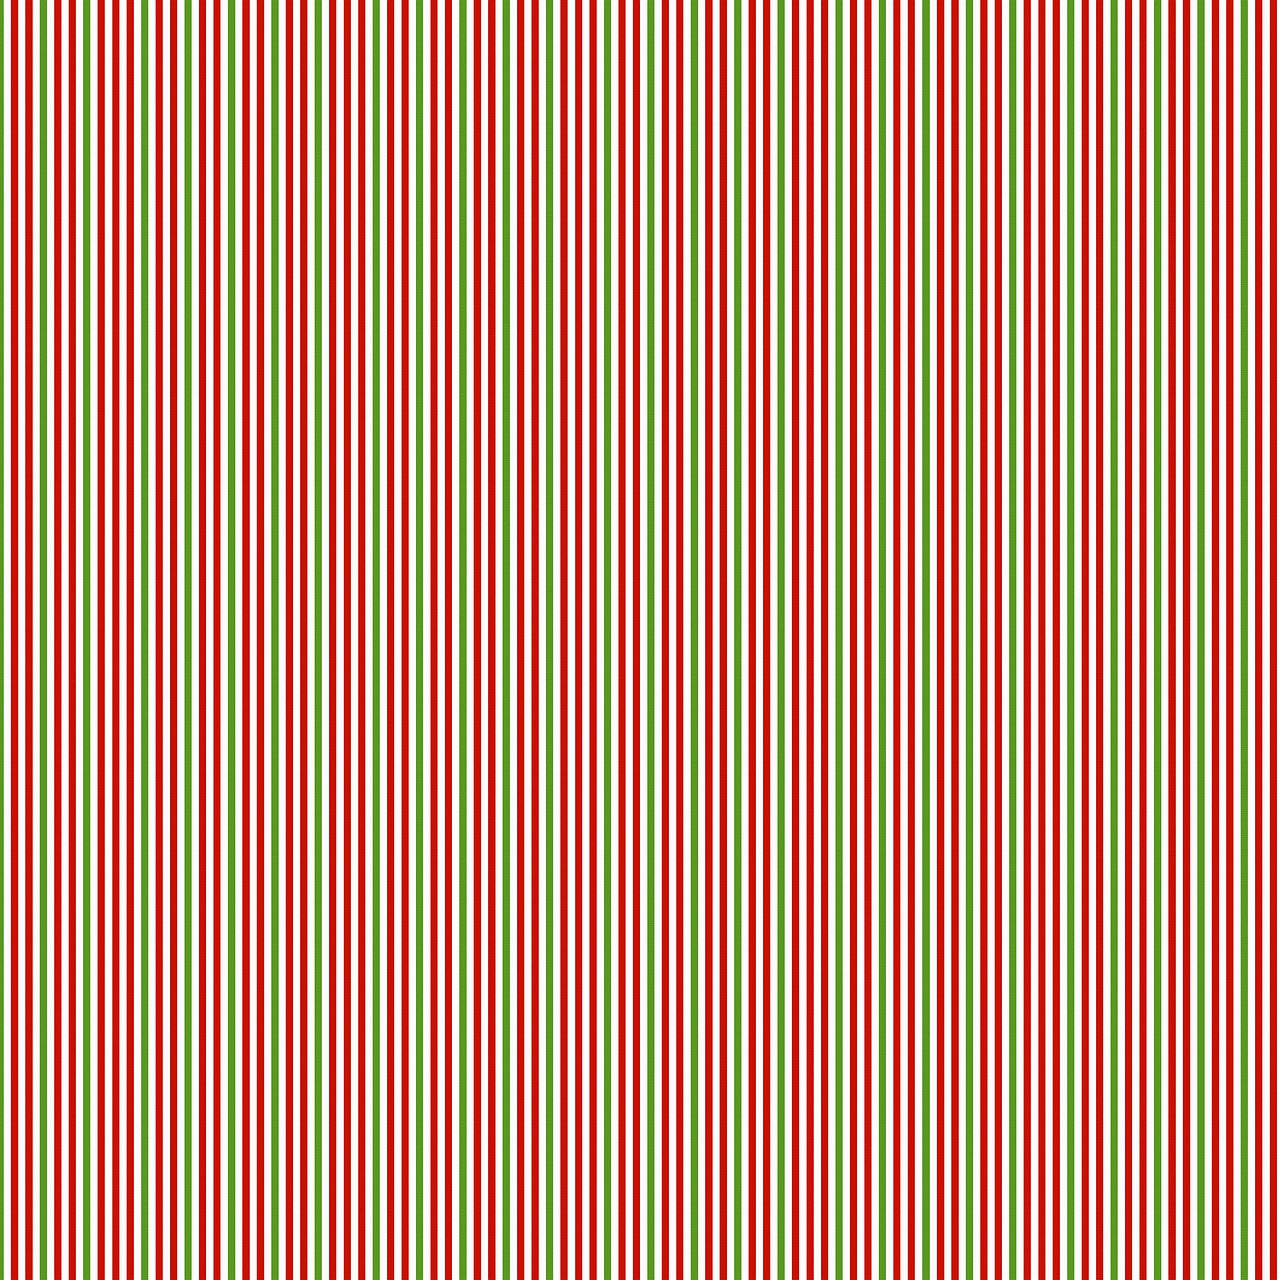 a red and white striped background, a digital rendering, by Bridget Riley, optical illusion, red green yellow color scheme, thin wires, red black white golden colors, raw dual pixel